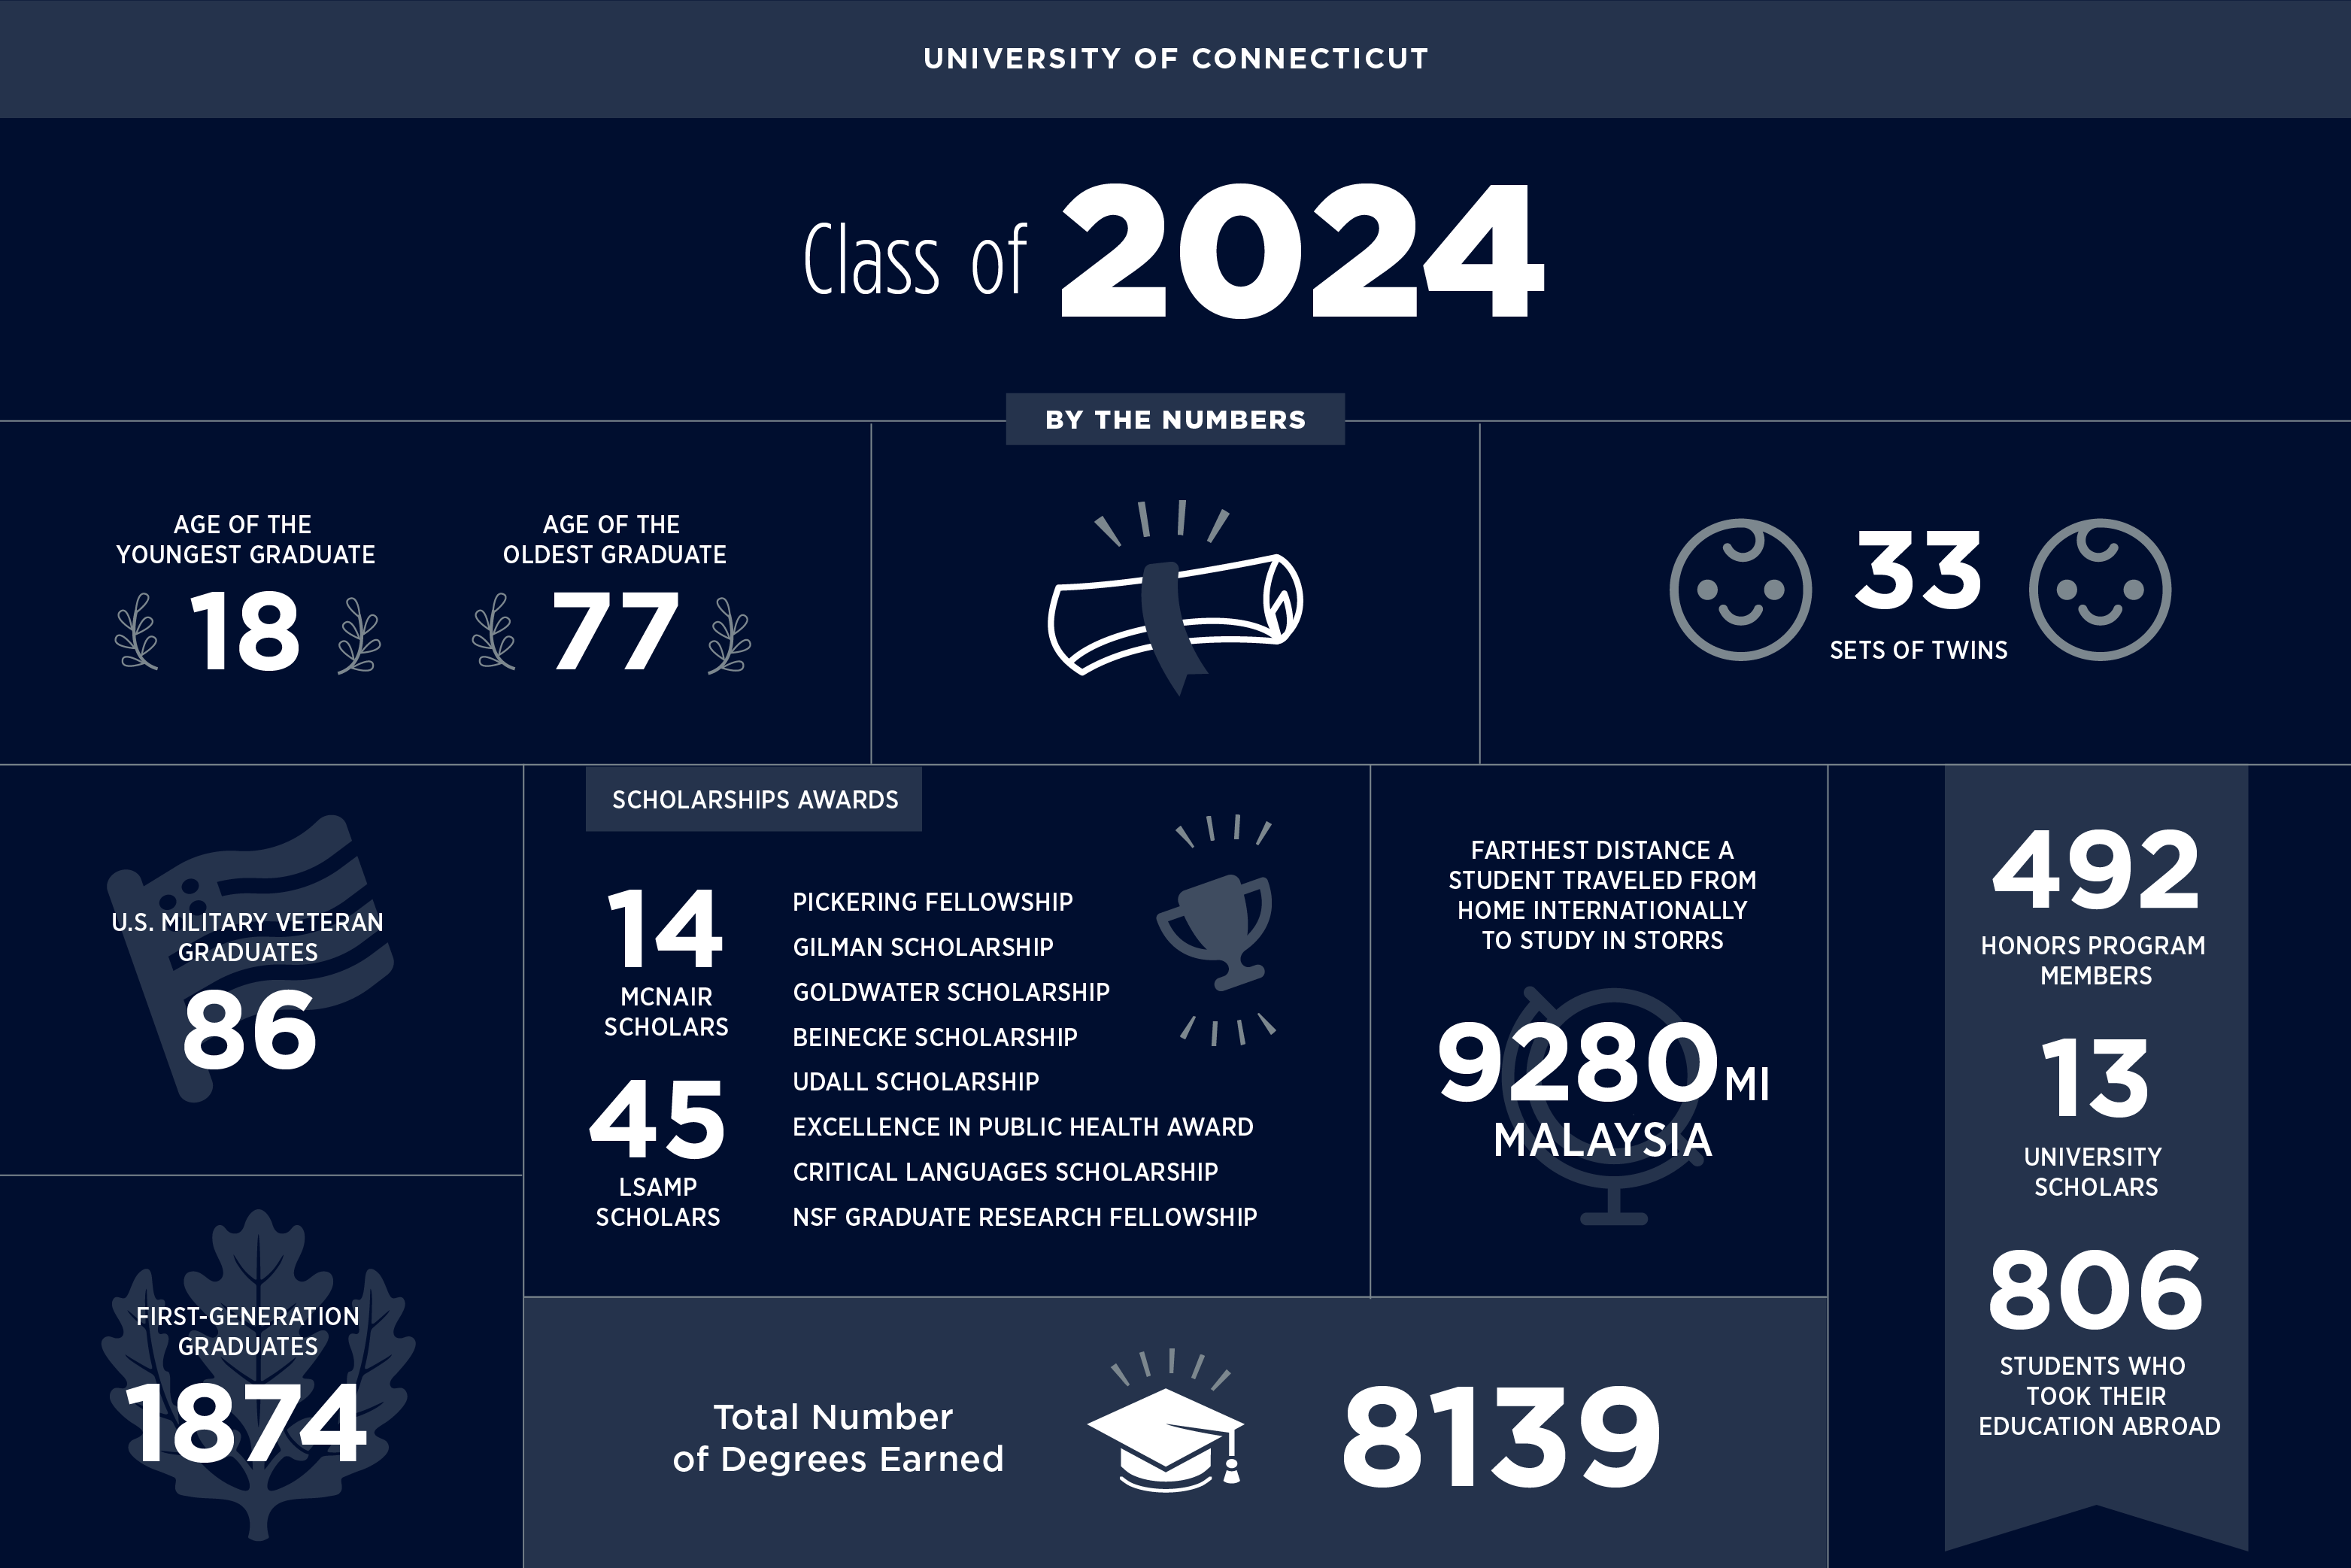 An infographic about the Class of 2024